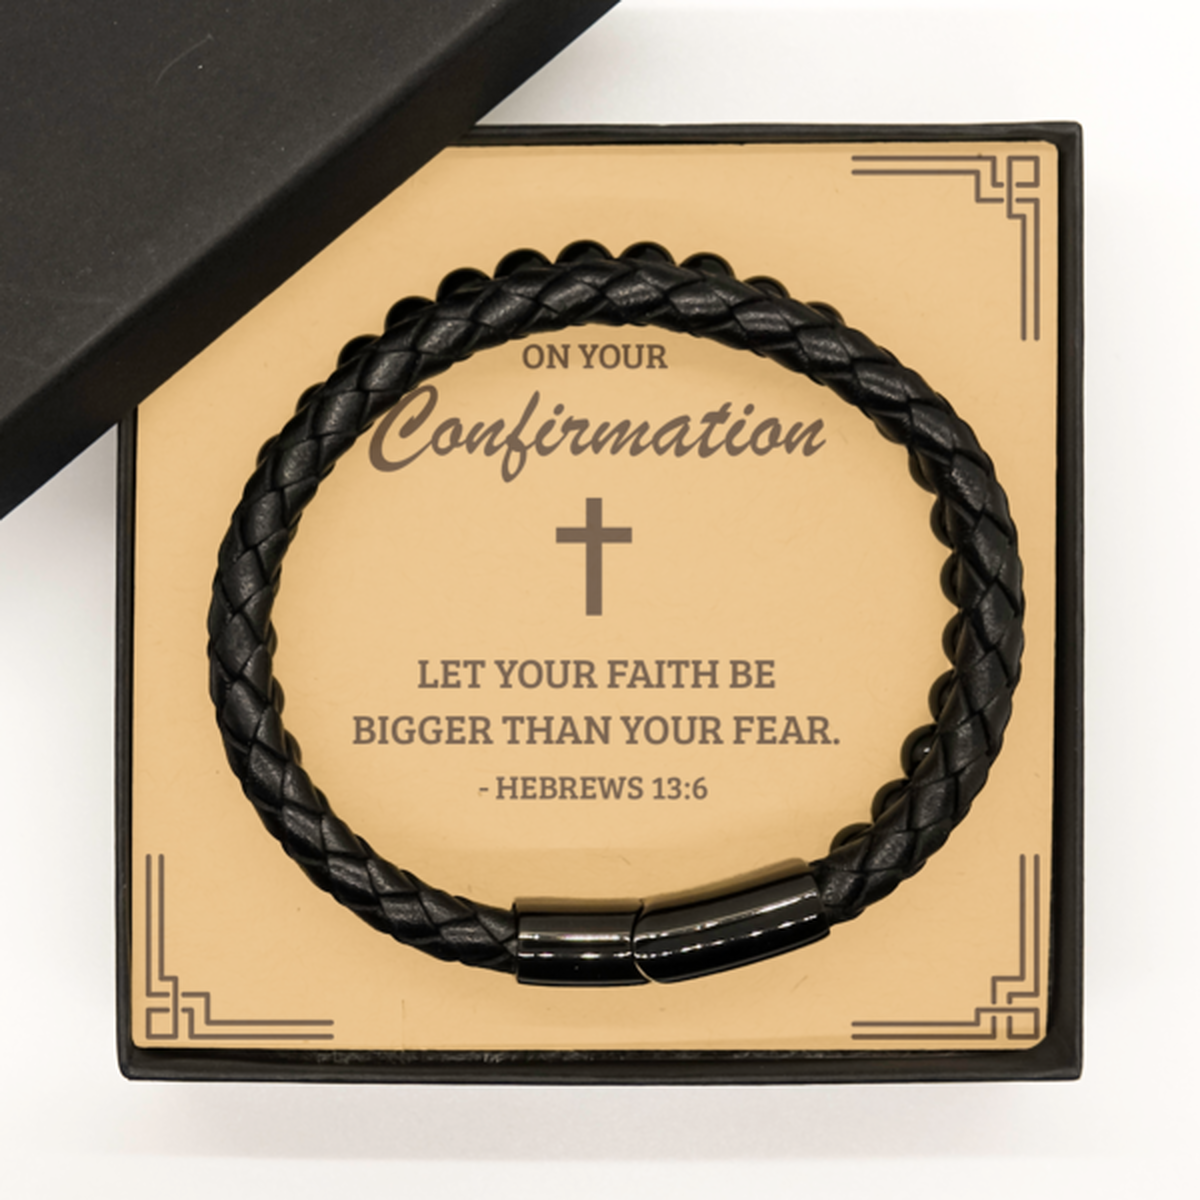 Confirmation Gifts for Teenage Boys, Let your faith be bigger than your fear, Stone Leather Bracelet with Bible Verse Message Card, Religious Catholic Bracelet for Son, Grandson, Dad, Godfather